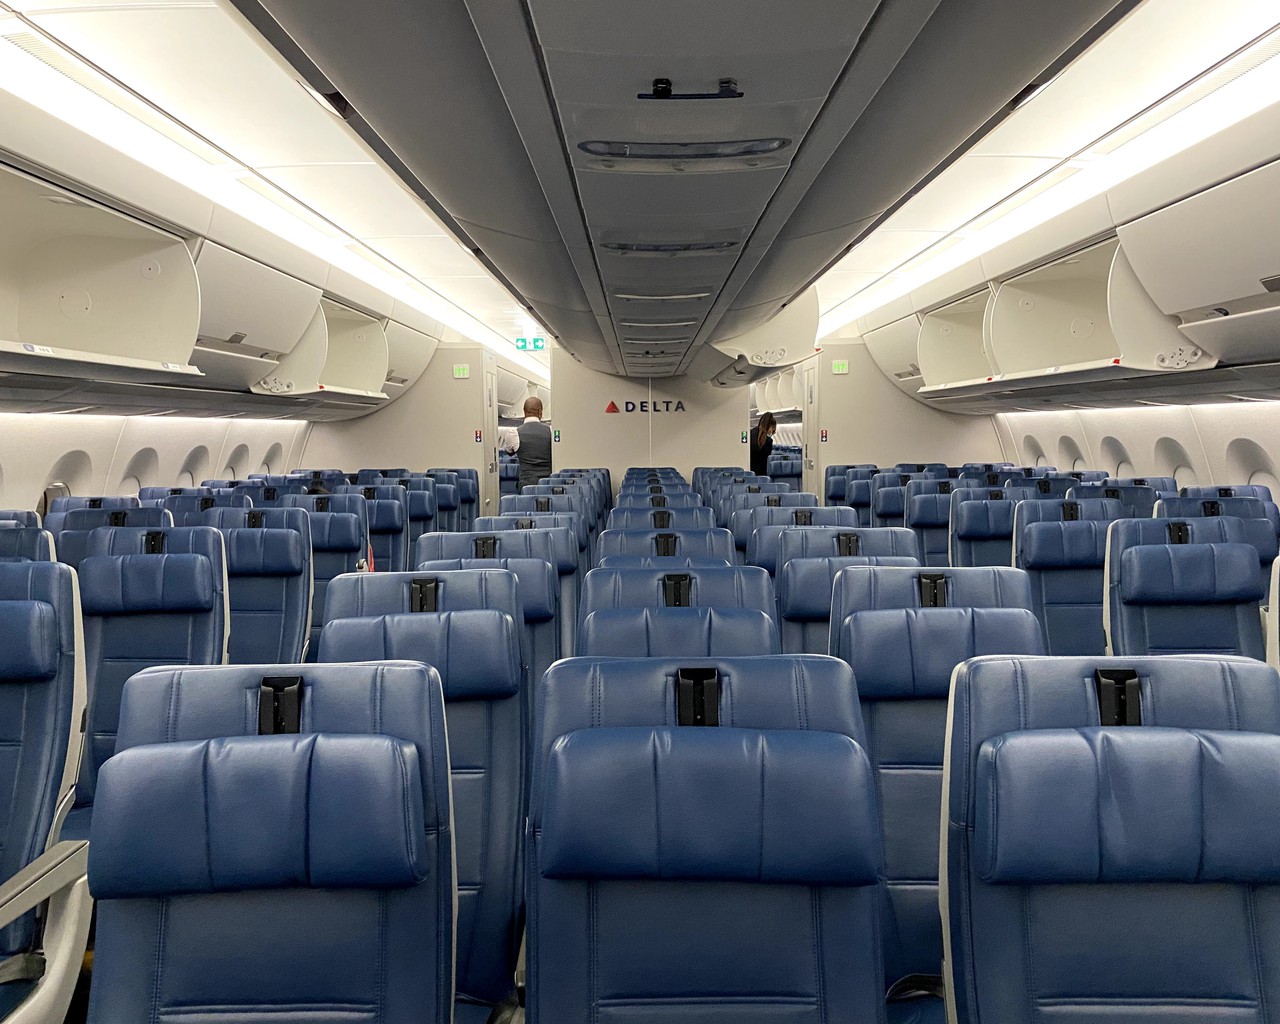 Review of Delta Air Lines flight from Atlanta to Seattle in Economy